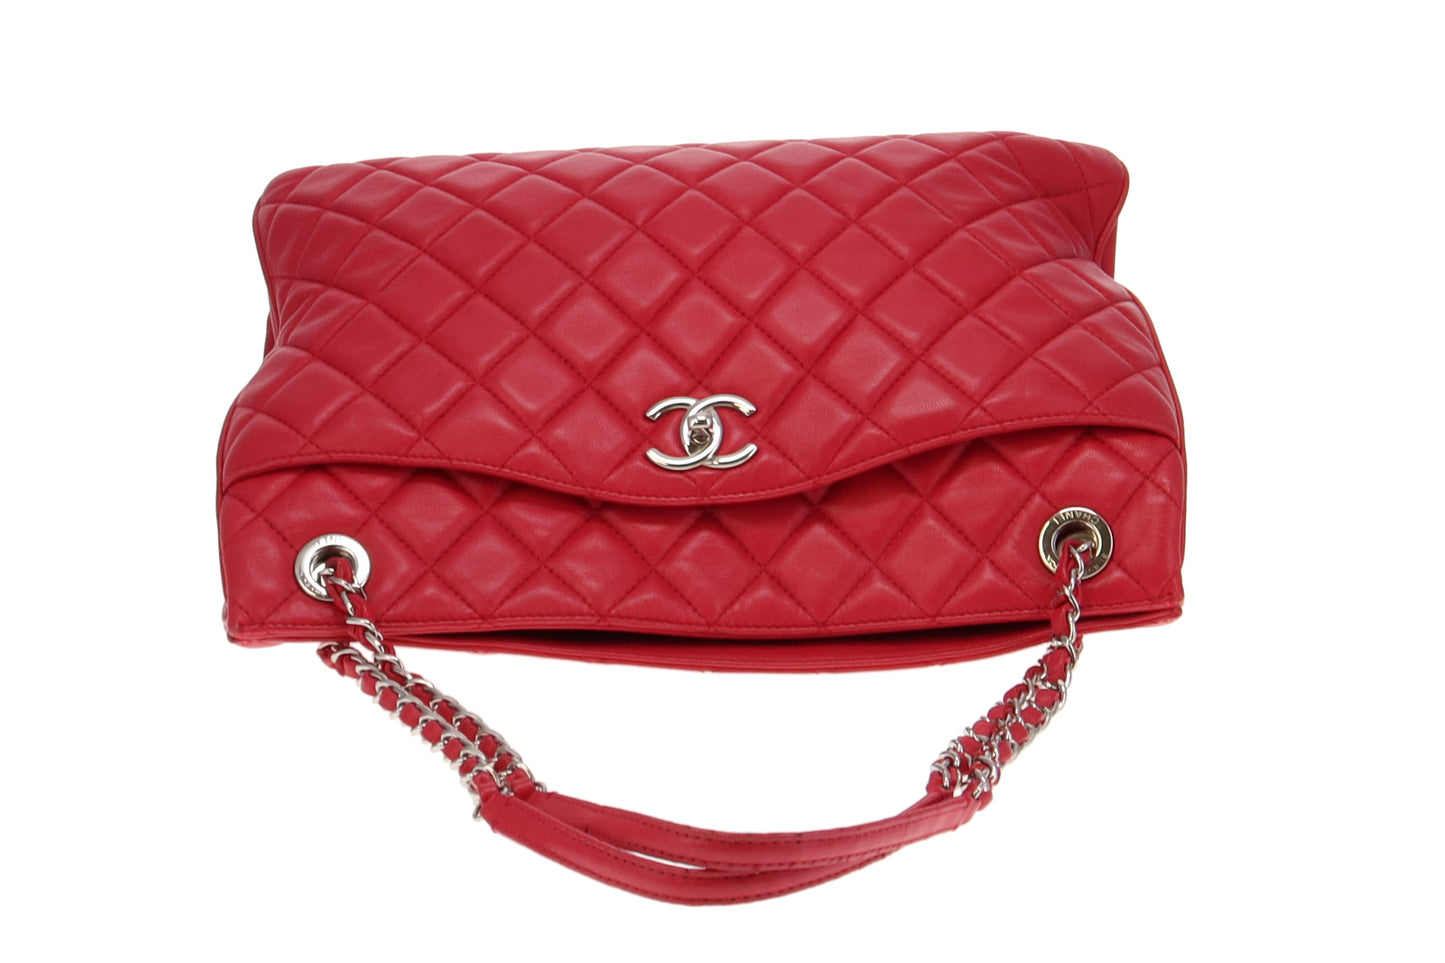 Chanel Hot Pink Soft Lambskin Double Chain Tote Bag 2014